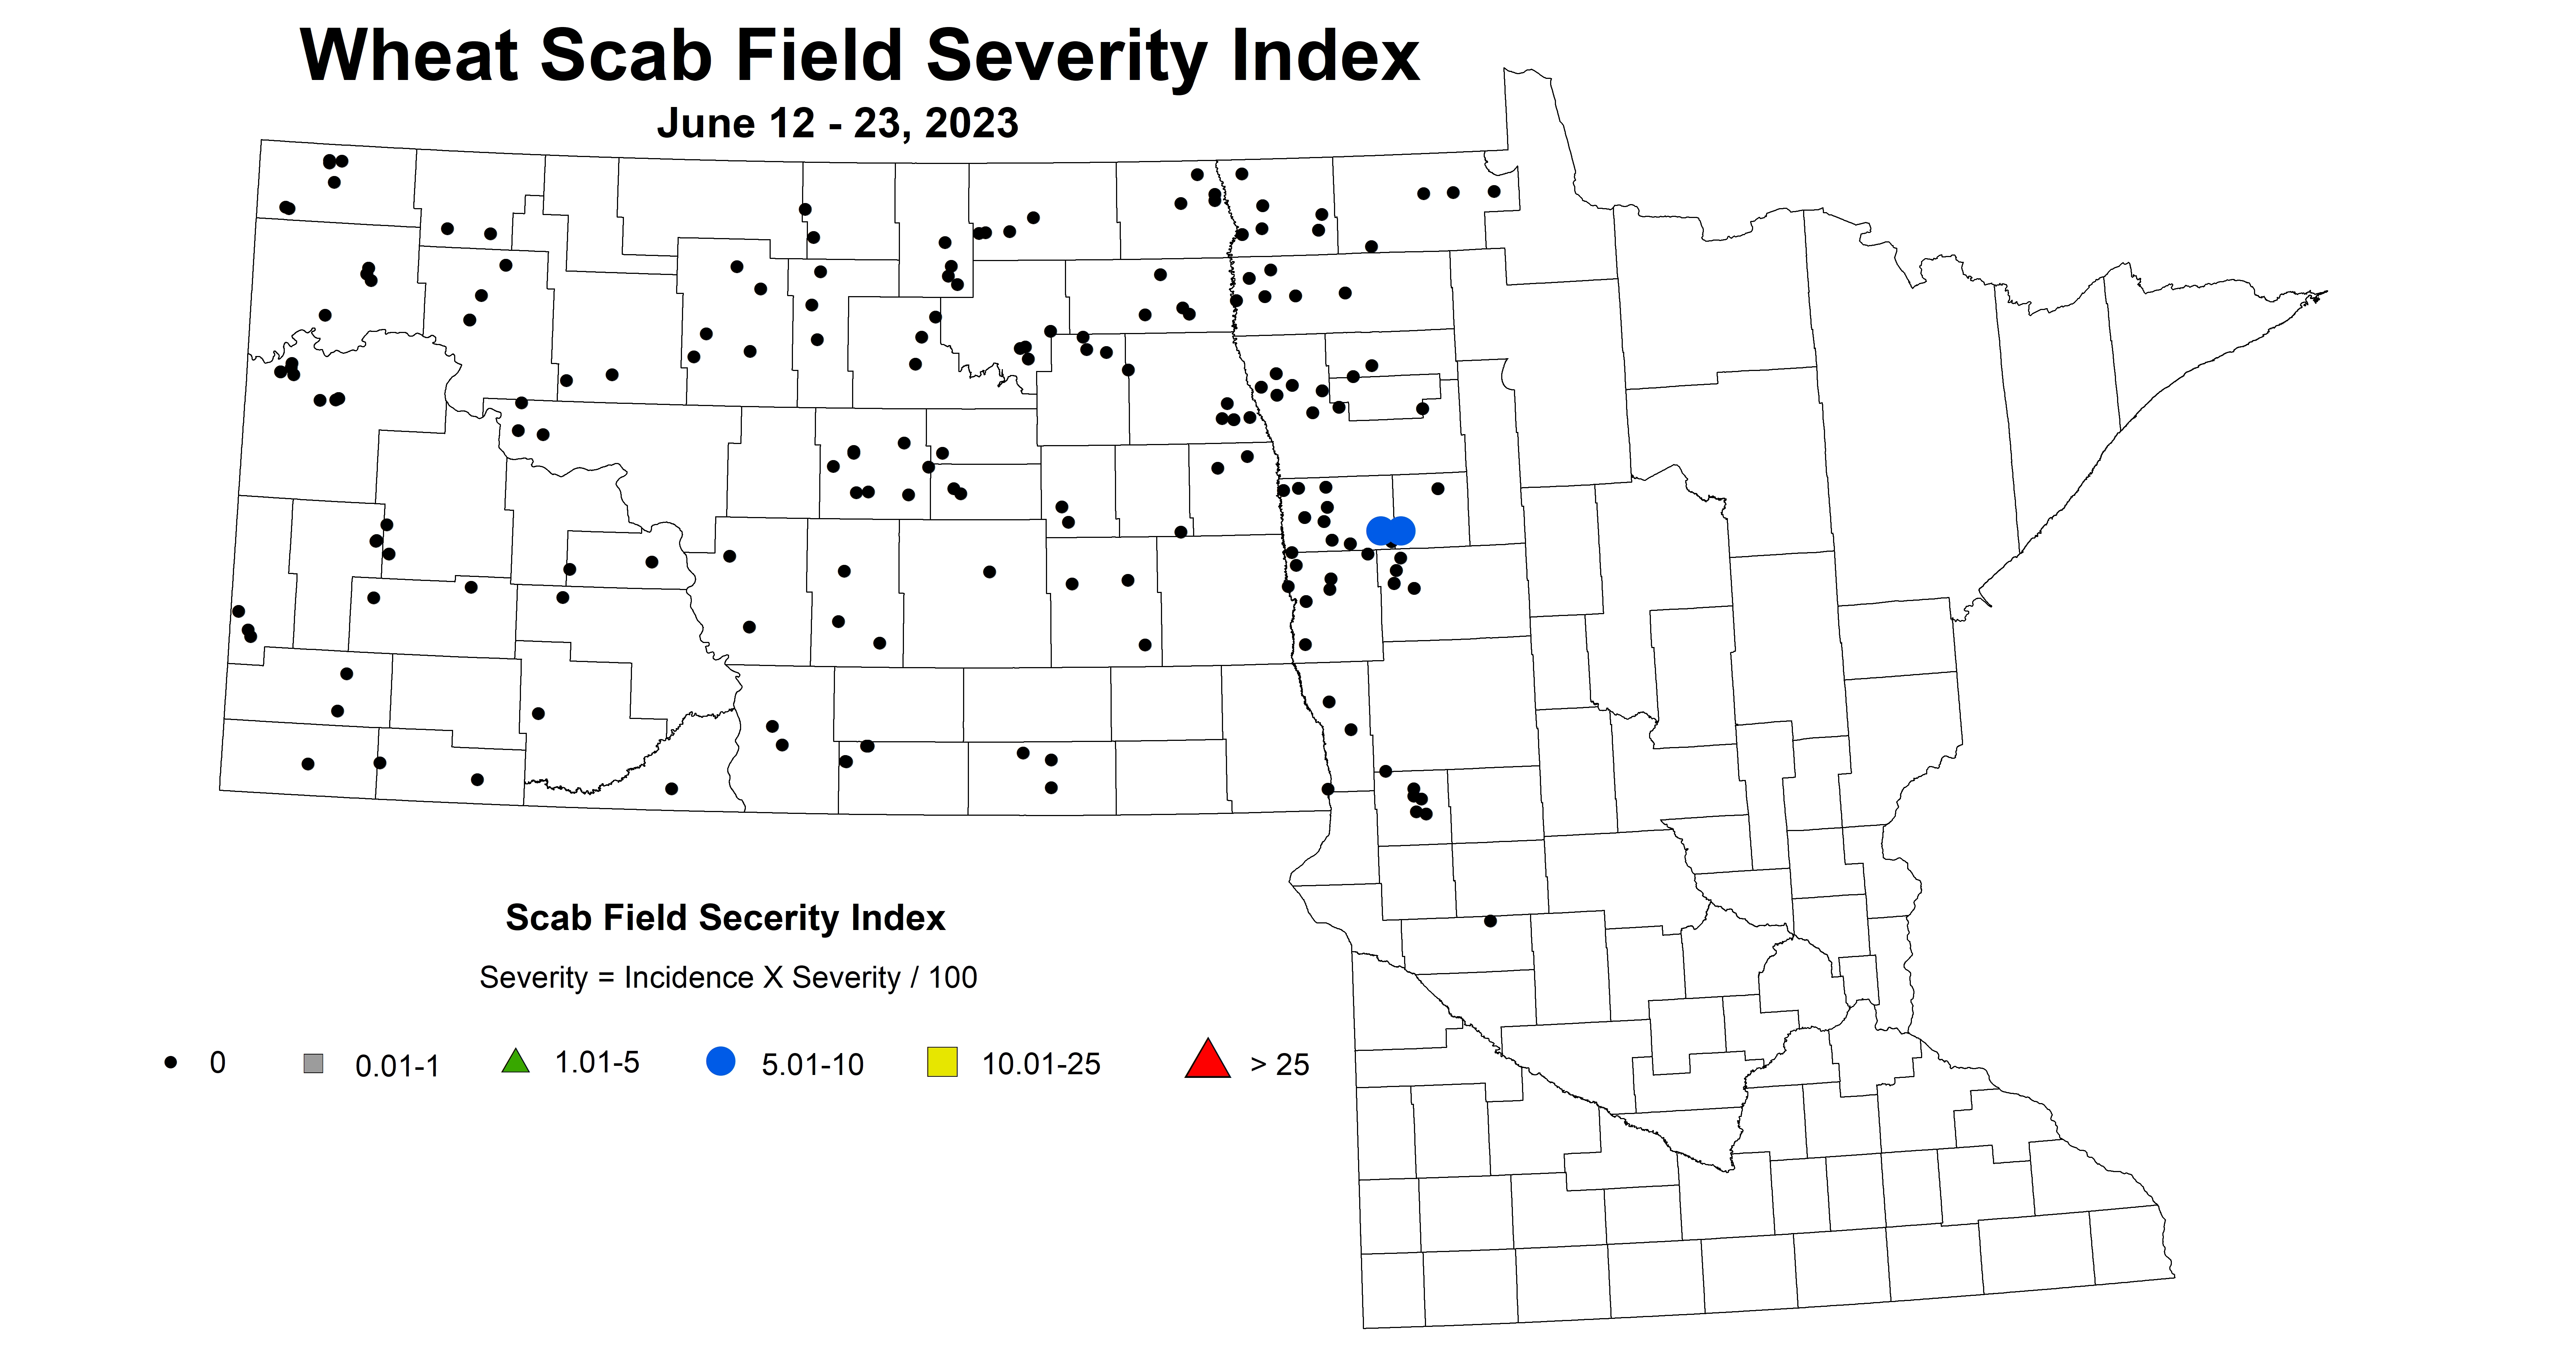 wheat scab field severity index June 12-23 2023